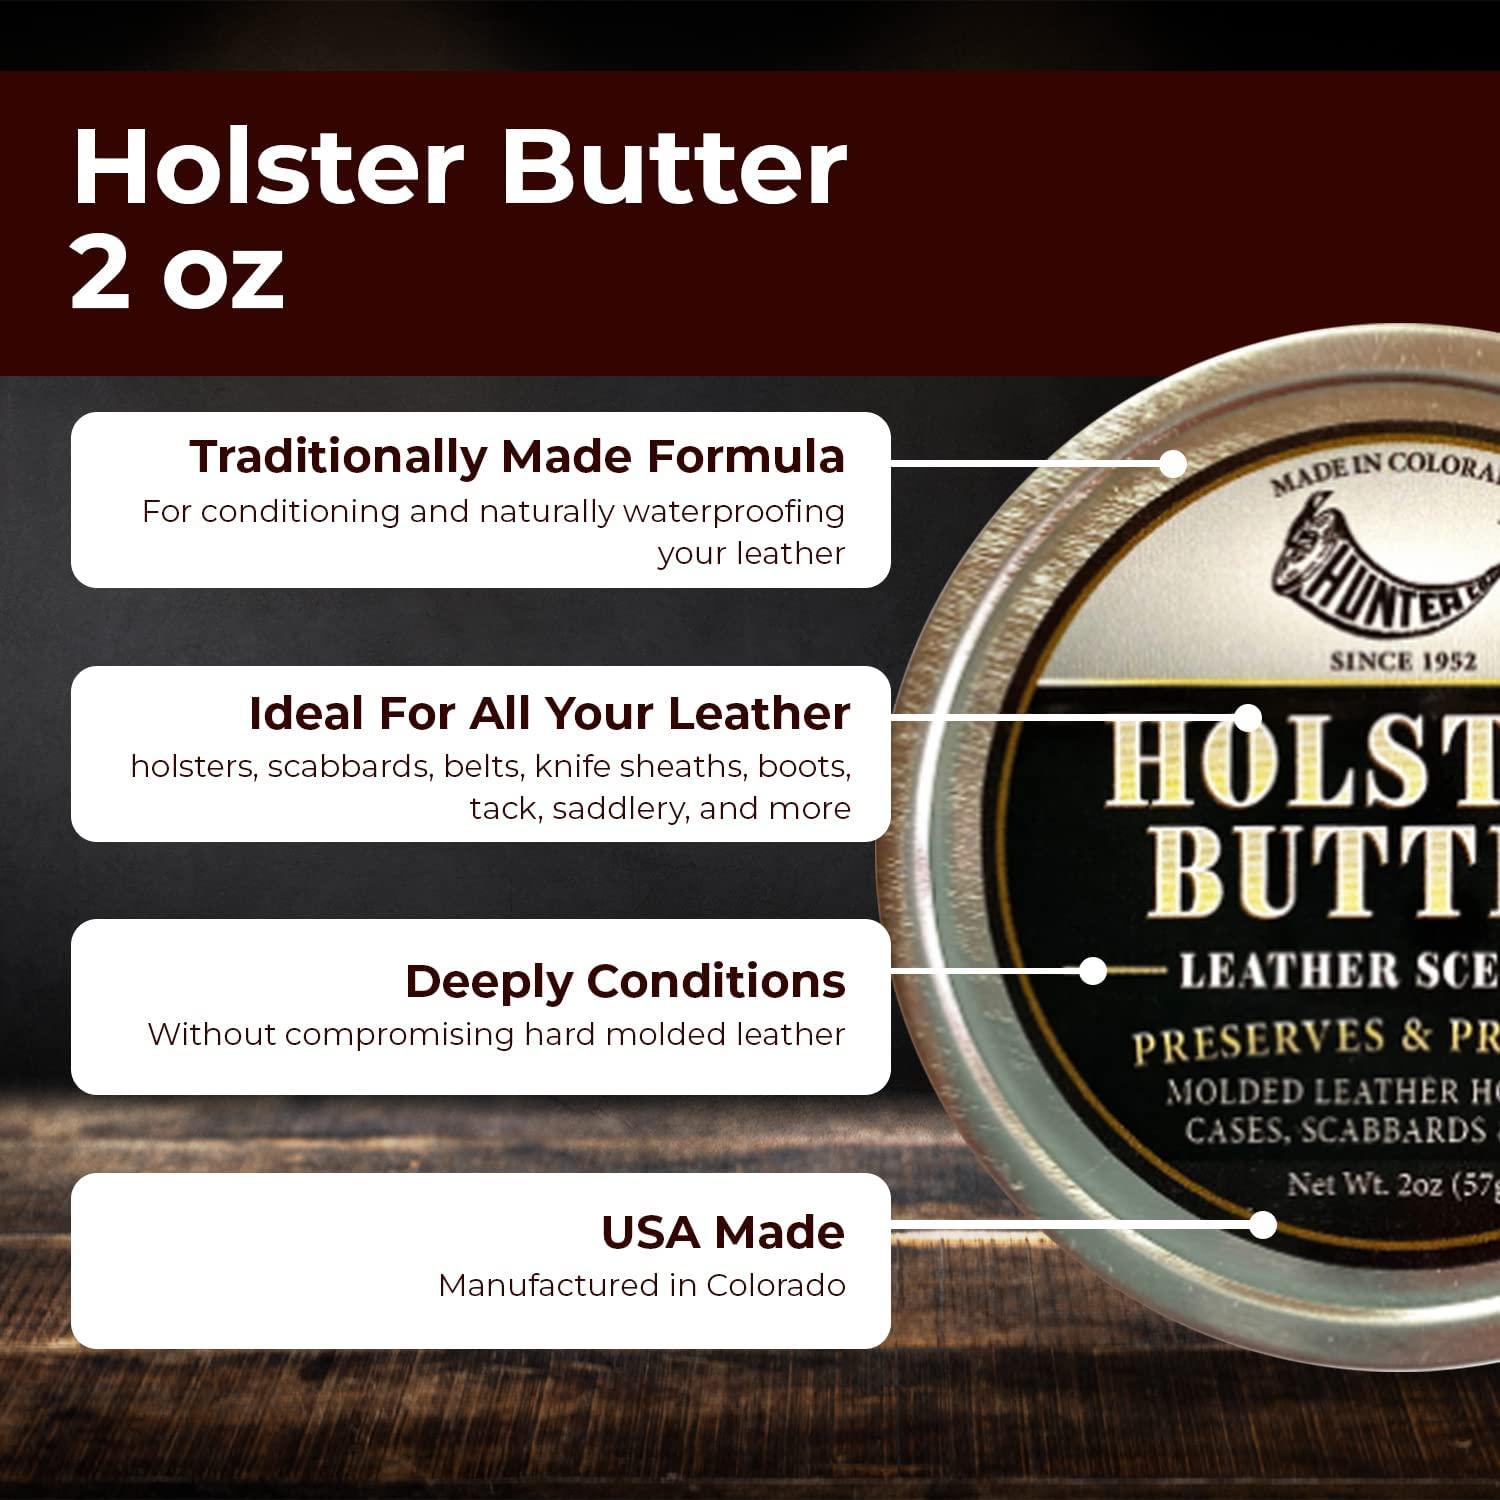 Hunter Company Leather Conditioner, Holster Butter, Leather Scented, Saddle  Soap, Cream Cleaner for Boots, Shoes, Holsters